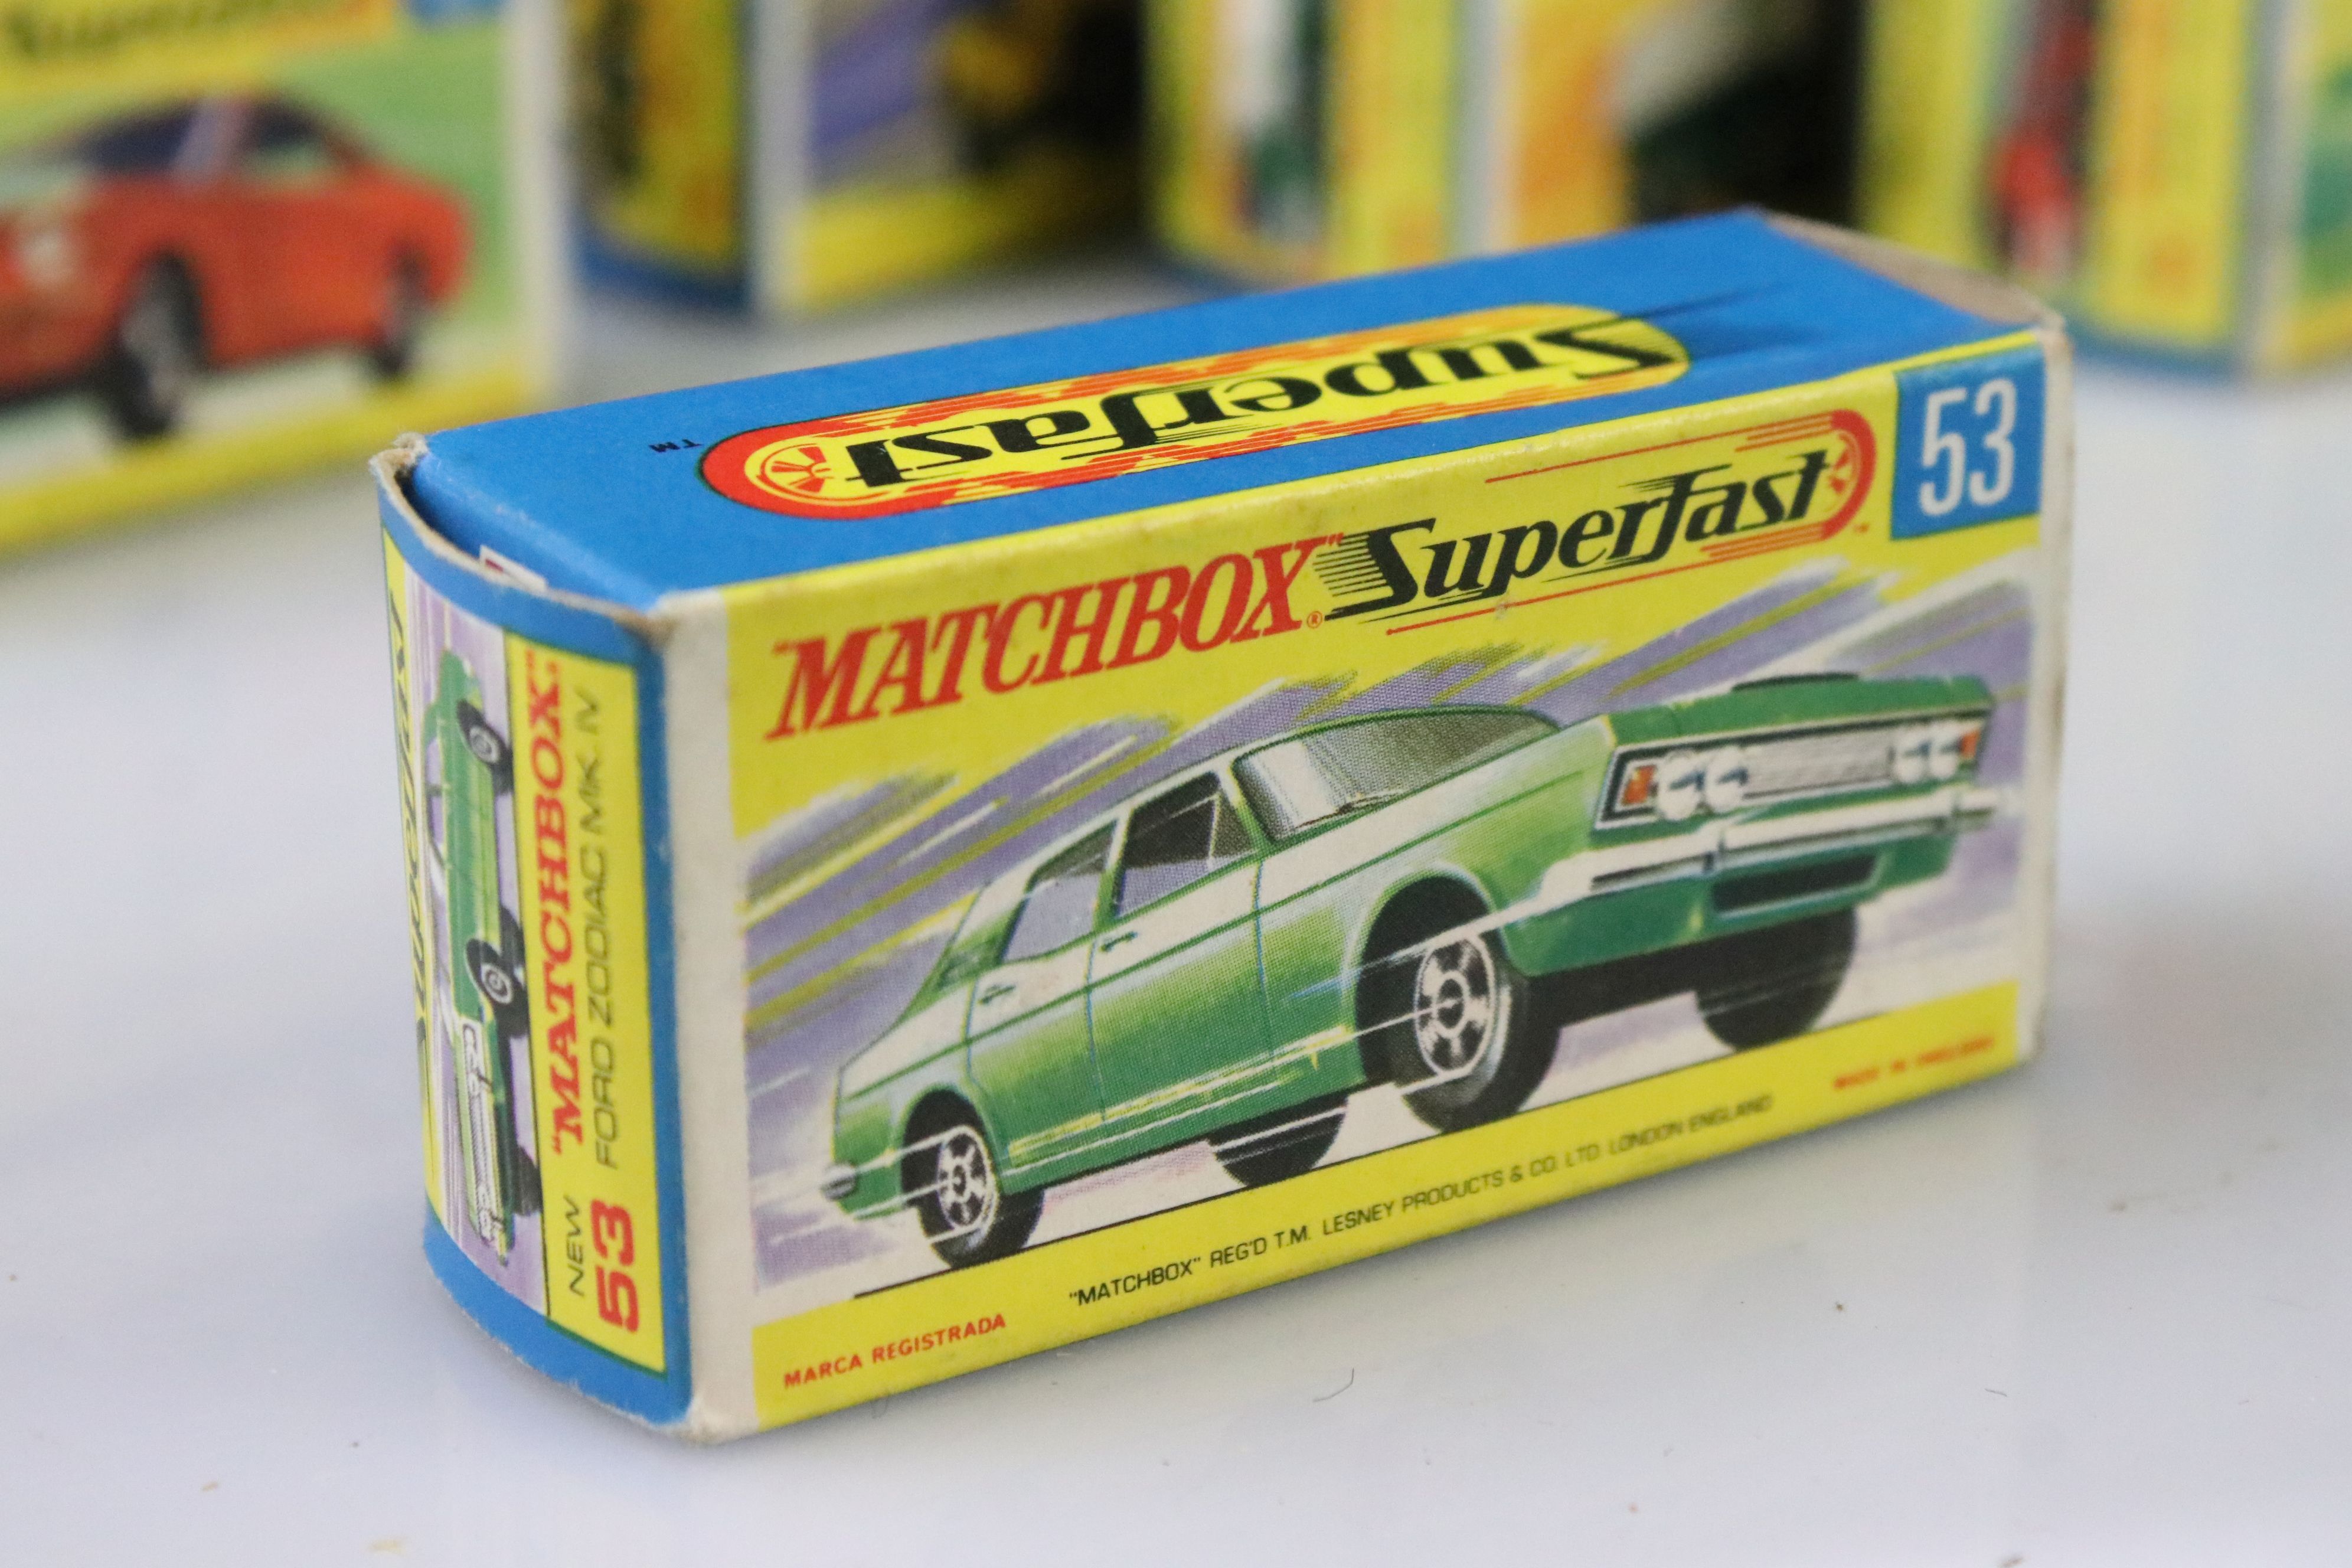 17 Boxed Matchbox Superfast diecast models to include 41 Ford GT, 29 Racing Mini, 57 Landrover - Image 7 of 53